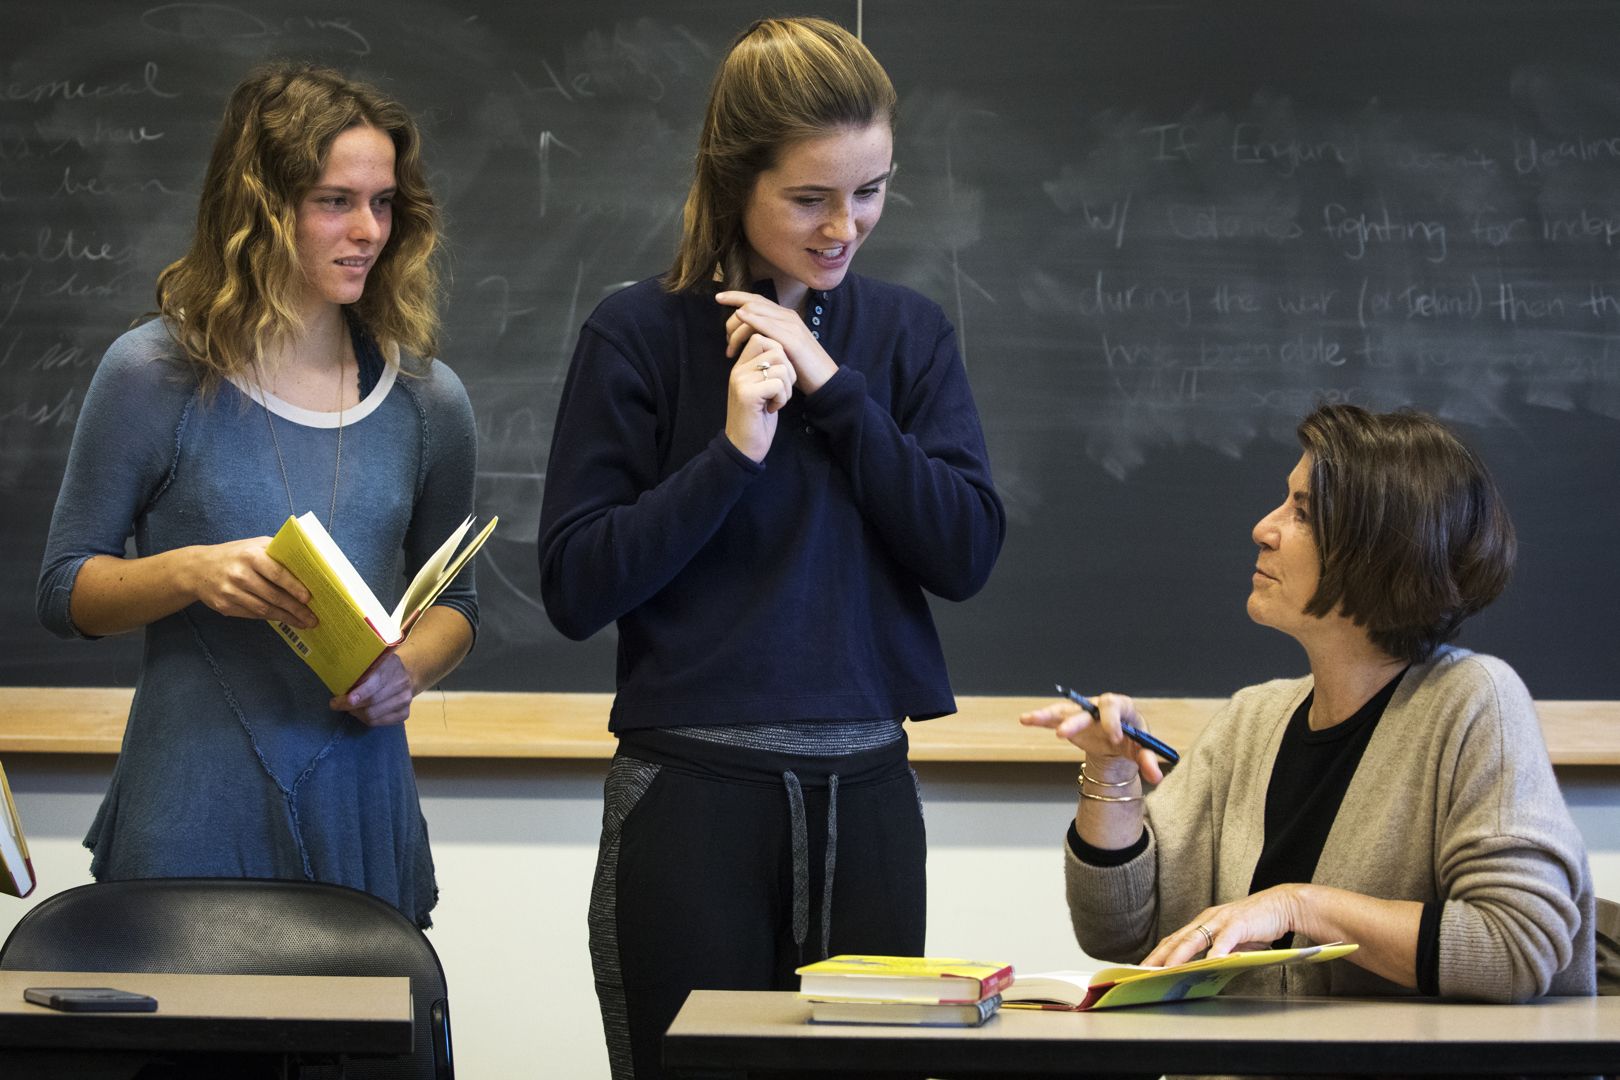 12 writing tips from Bates students and professors | News | Bates College